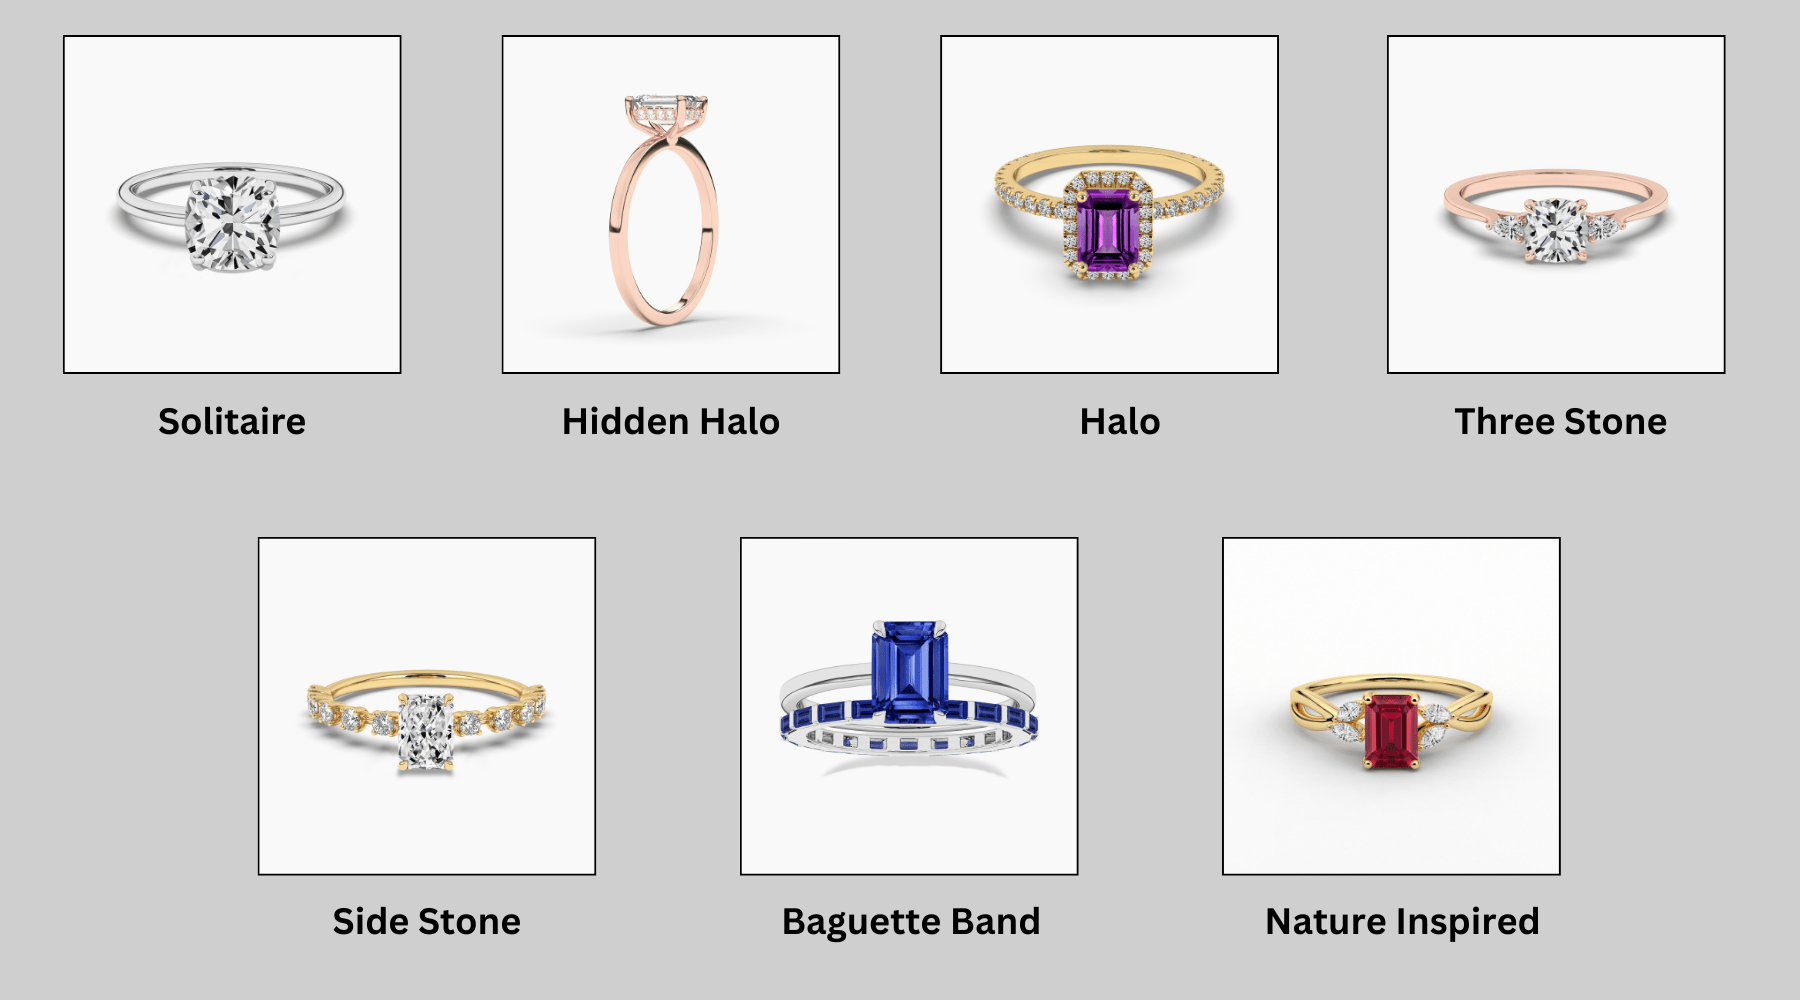 How to Choose an Engagement Ring: A Complete Guide